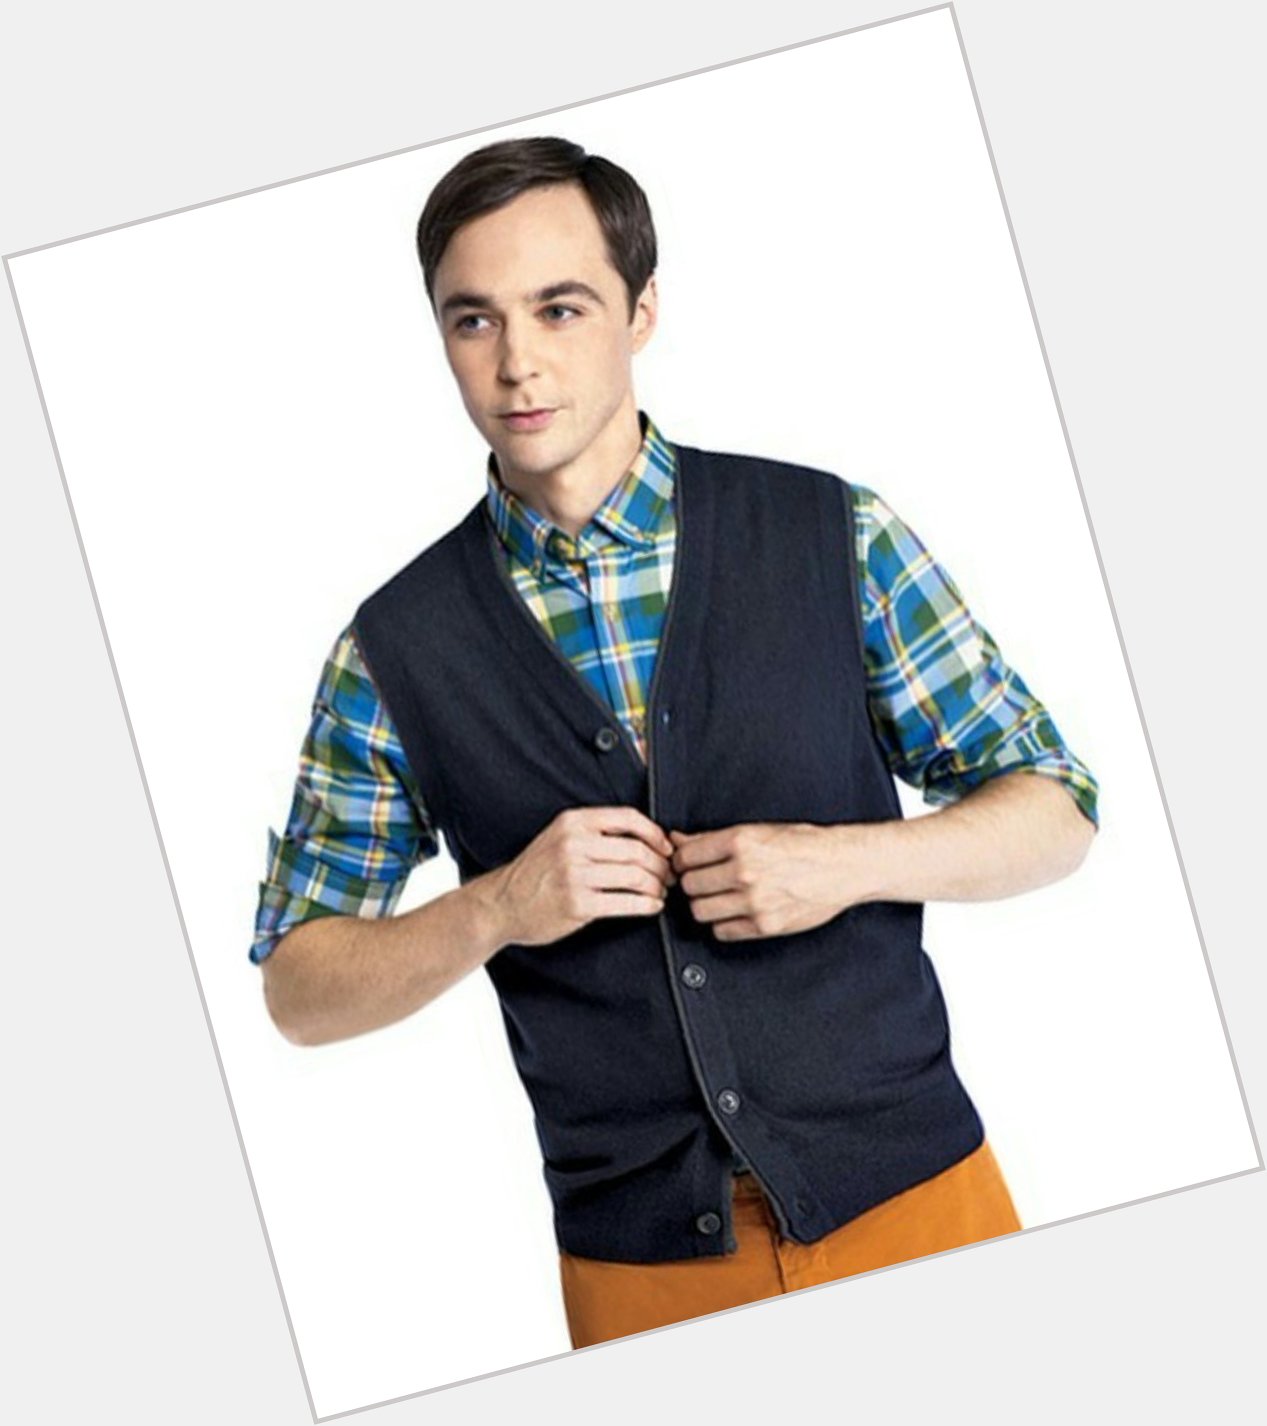 HAPPY BDAY TO THE AMAZING JIM PARSONS. 